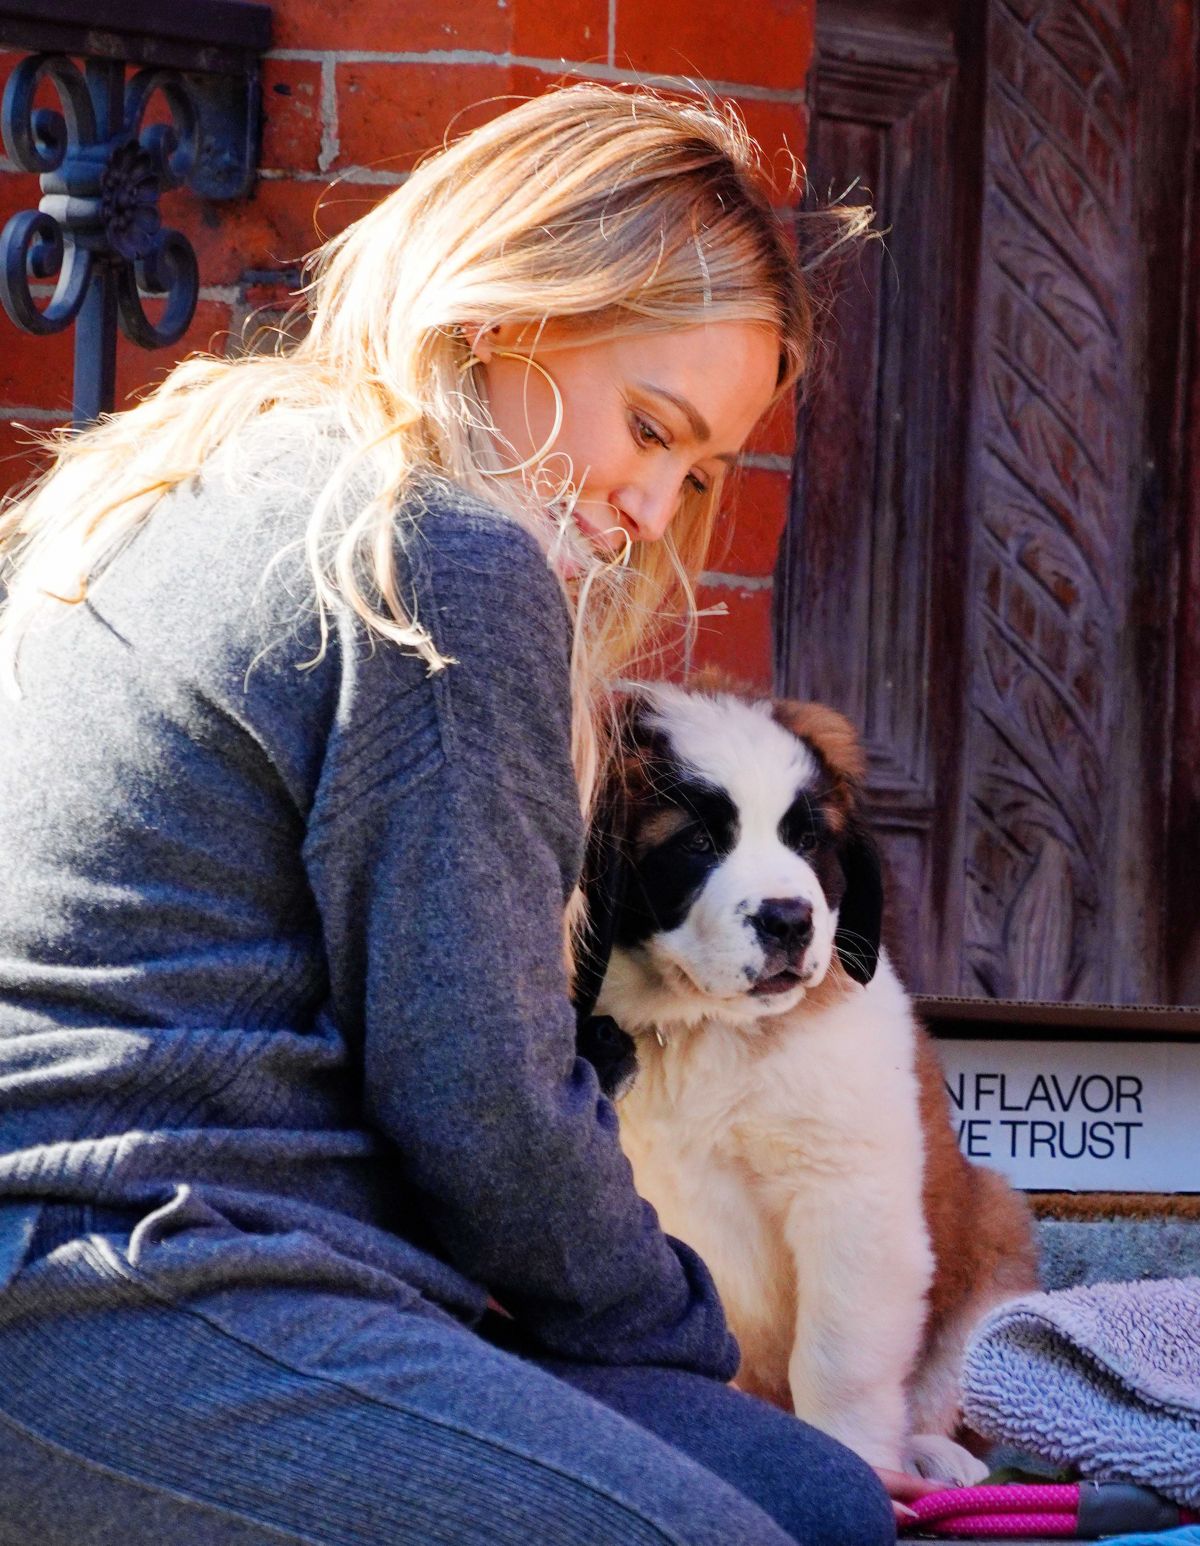 hilary-duff-out-with-her-dog-in-new-york-11-14-2020-8.jpg